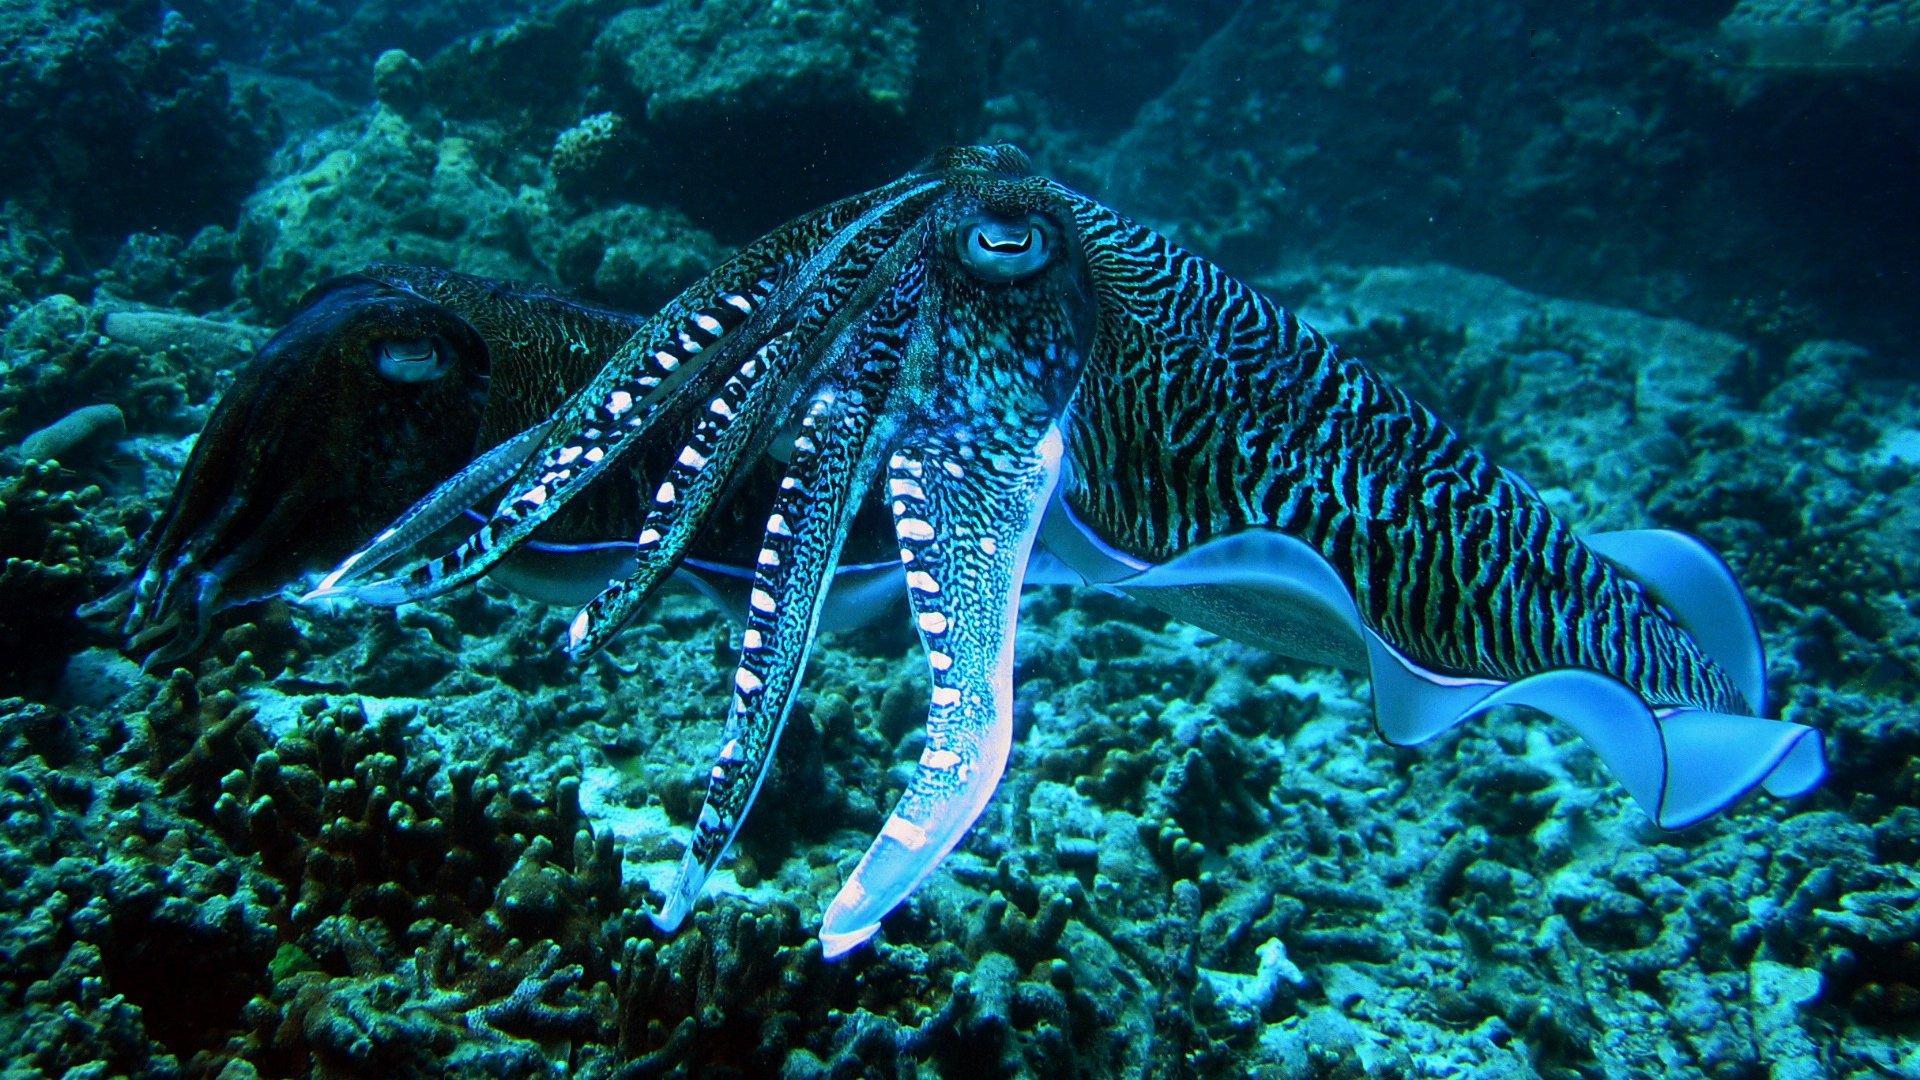 Cuttlefishes Full Hd Wallpaper 4k, Cuttlefishes, Animal